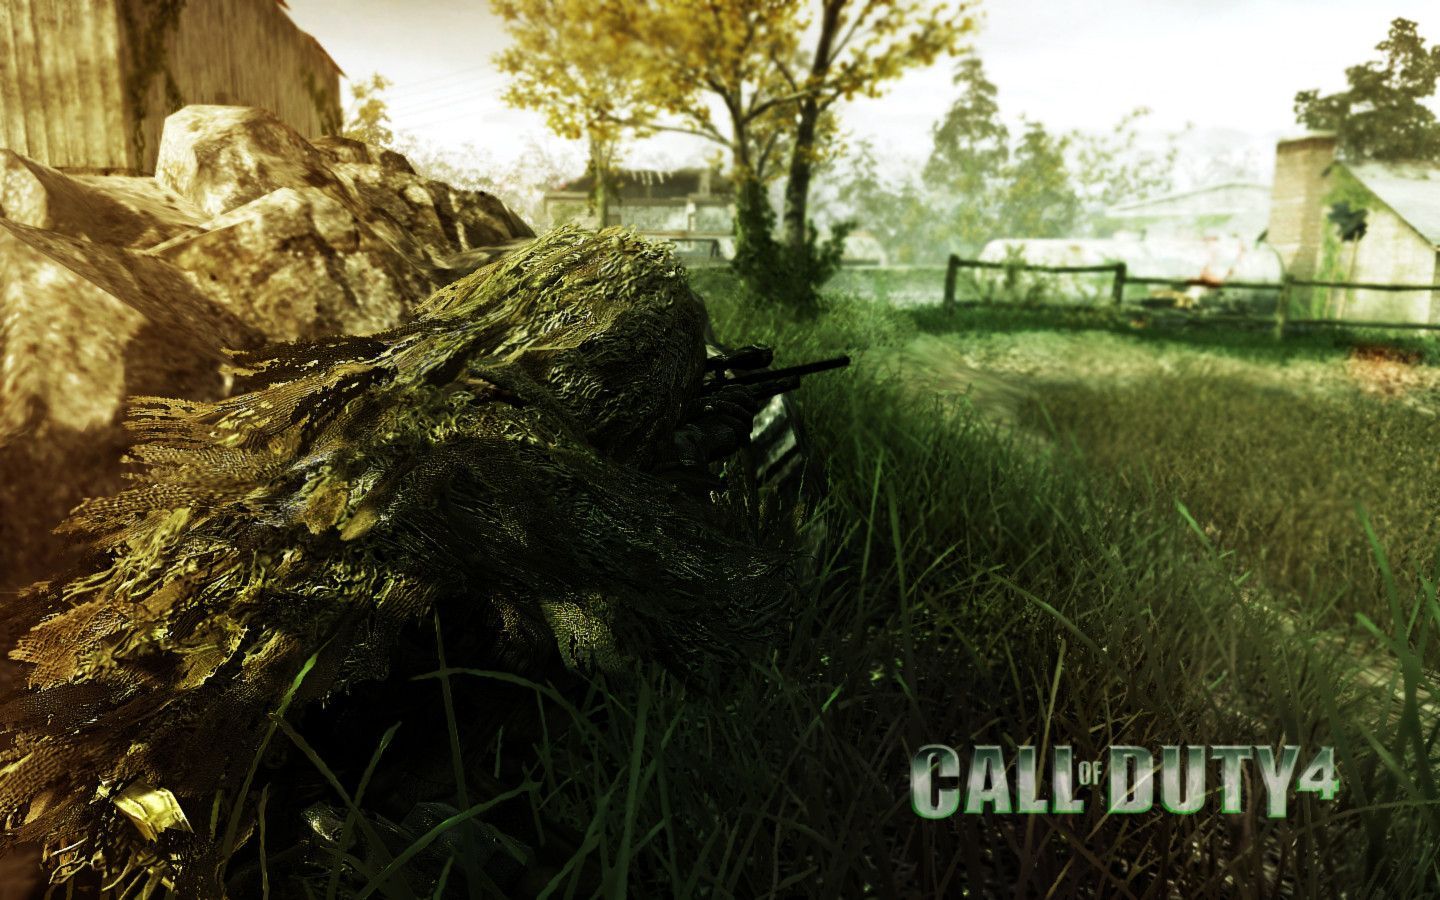 Call Of Duty 4 Wallpapers - Wallpaper Cave